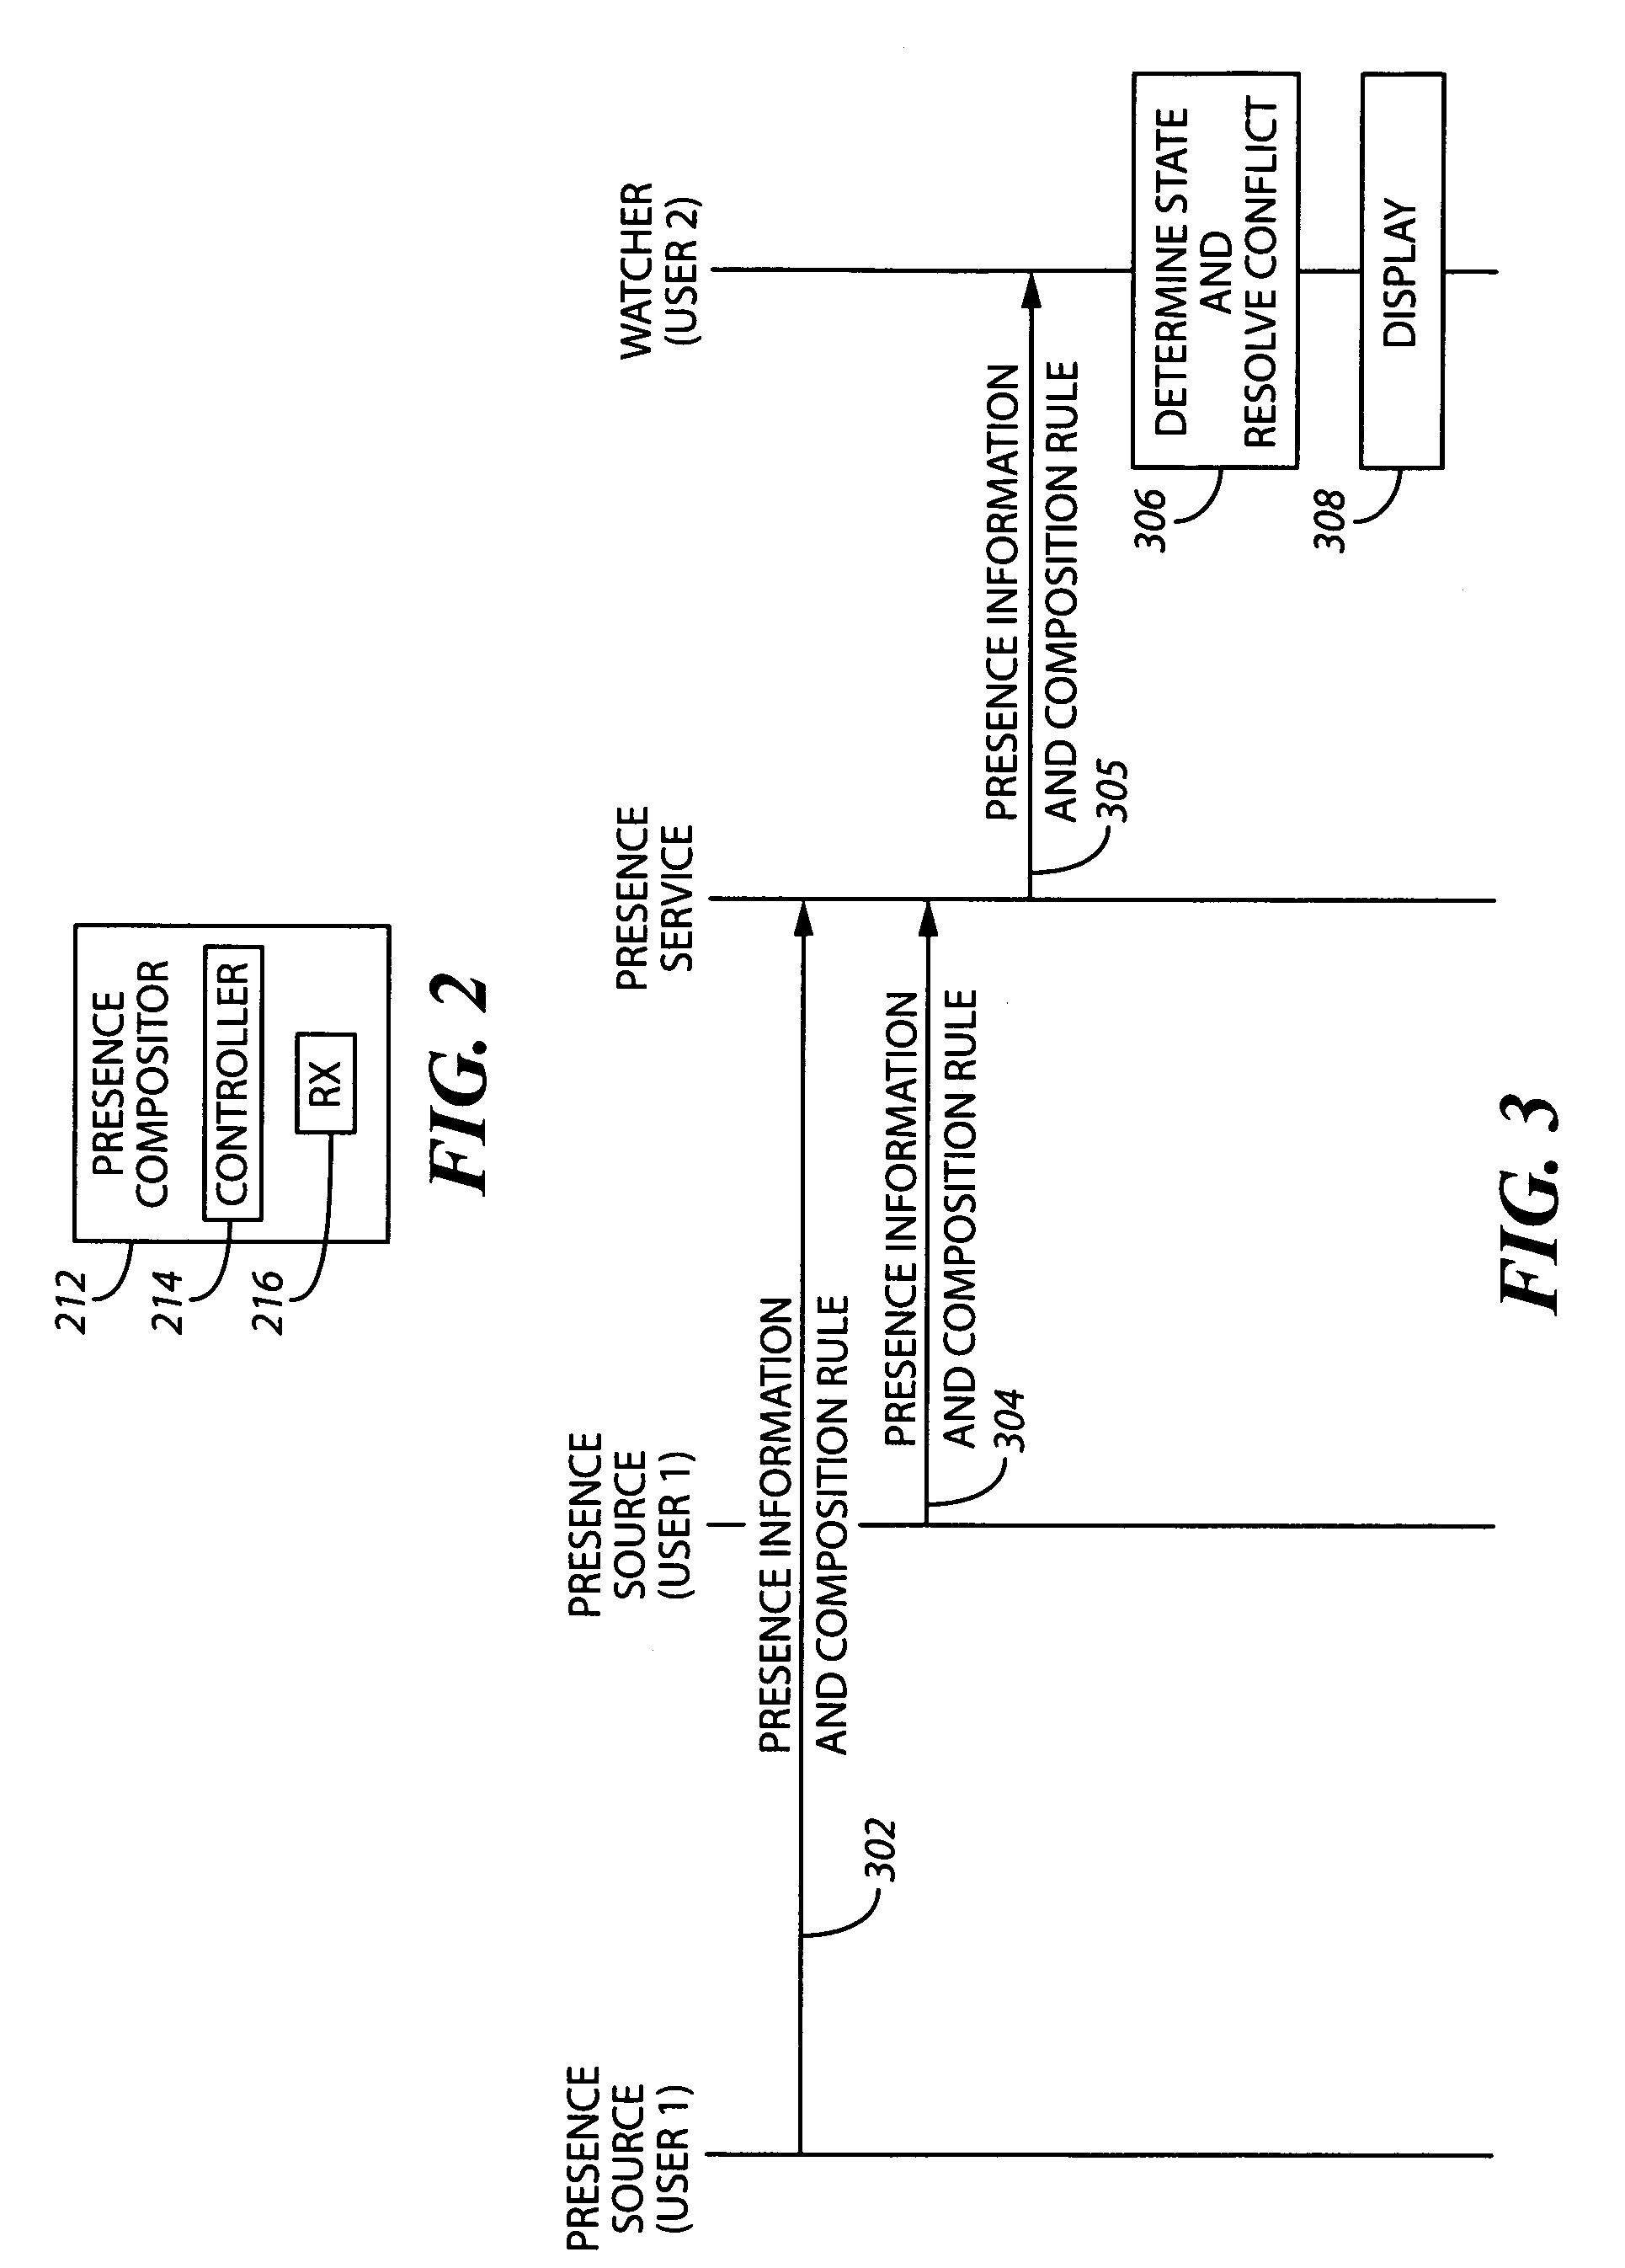 System and method for determining a presence state of a user